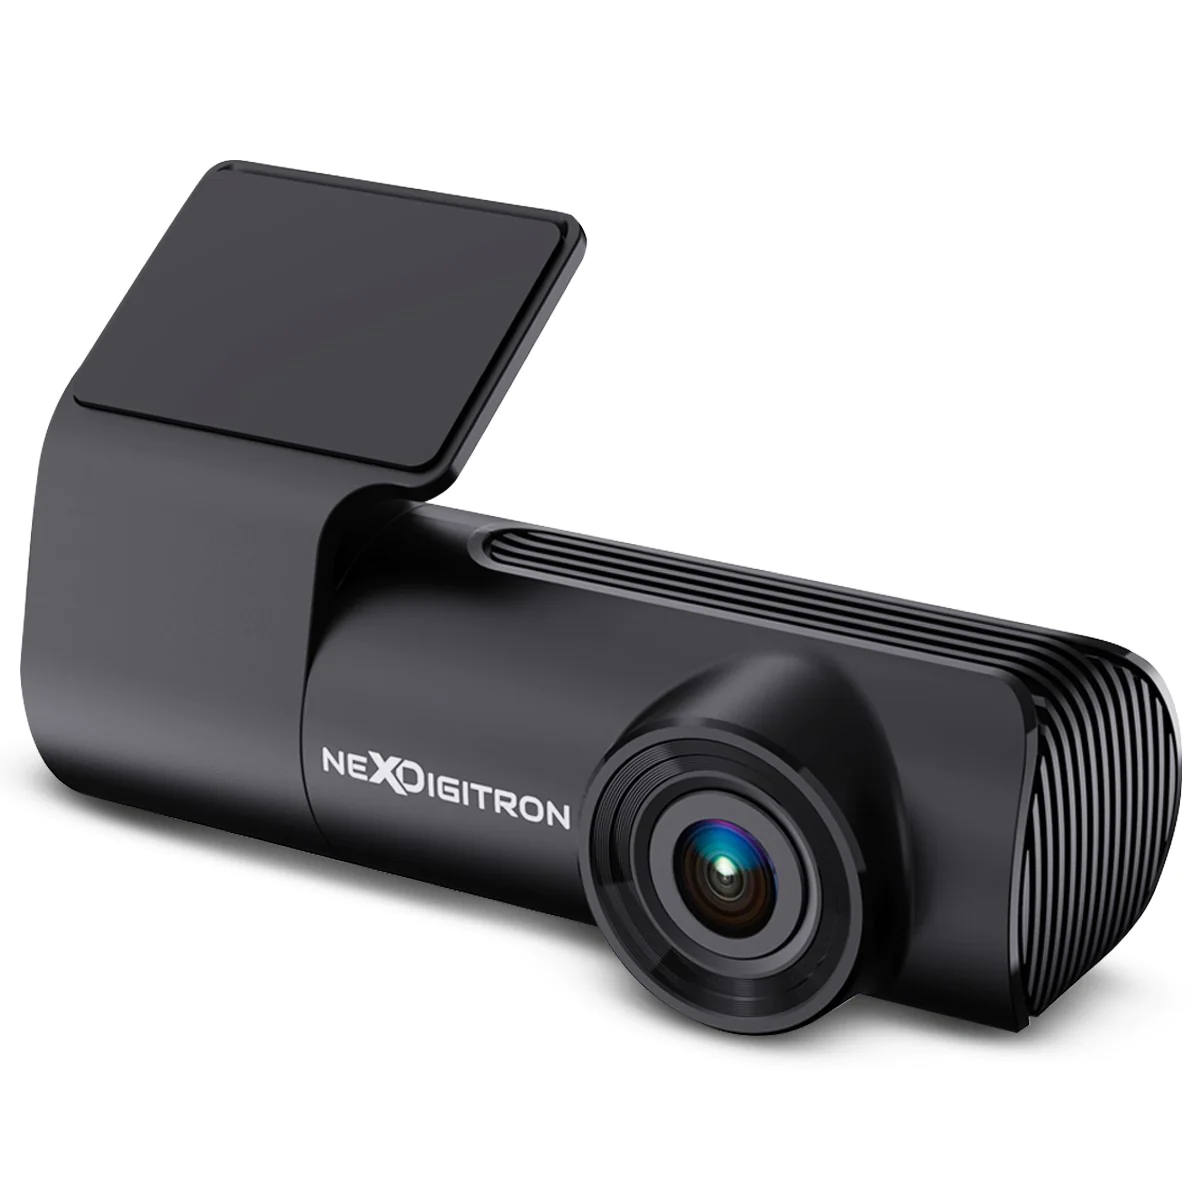 Best Dashcams for cars